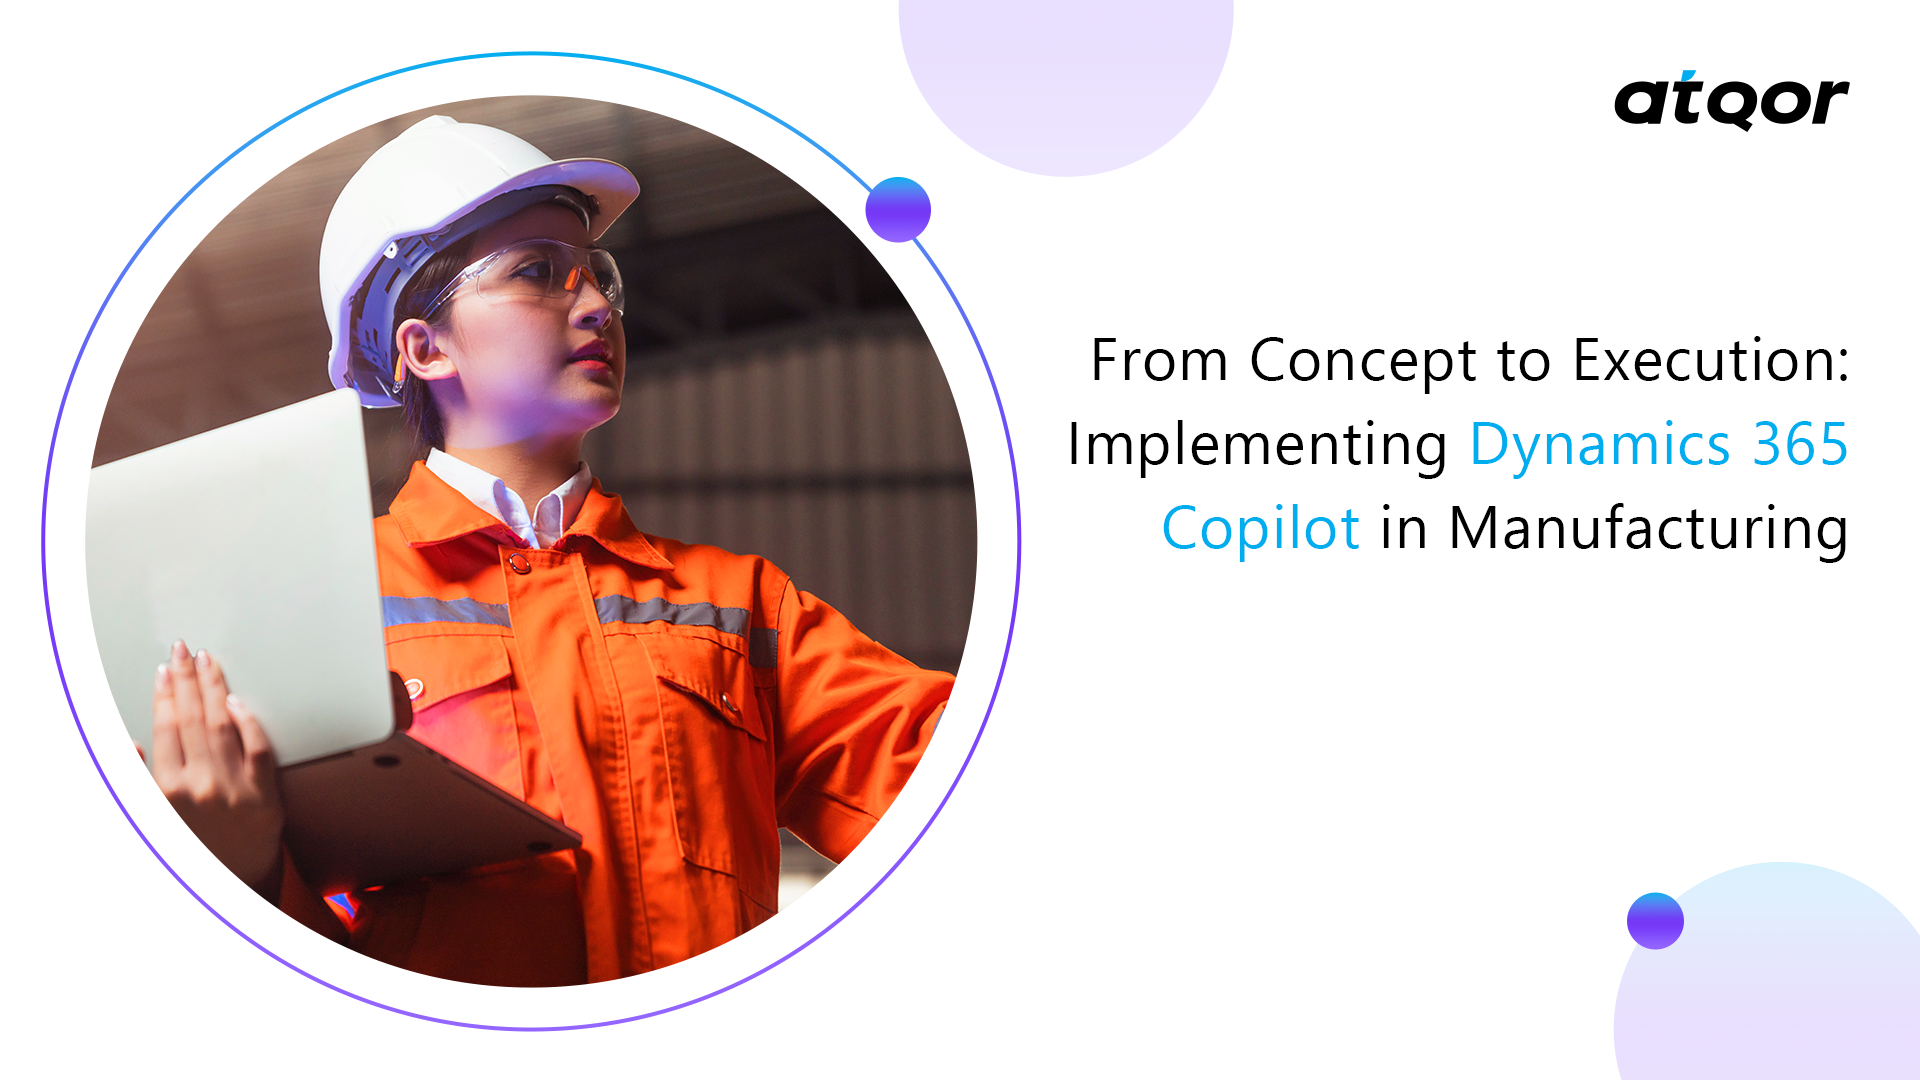 From Concept To Execution Implementing Dynamics 365 Copilot In Manufacturing